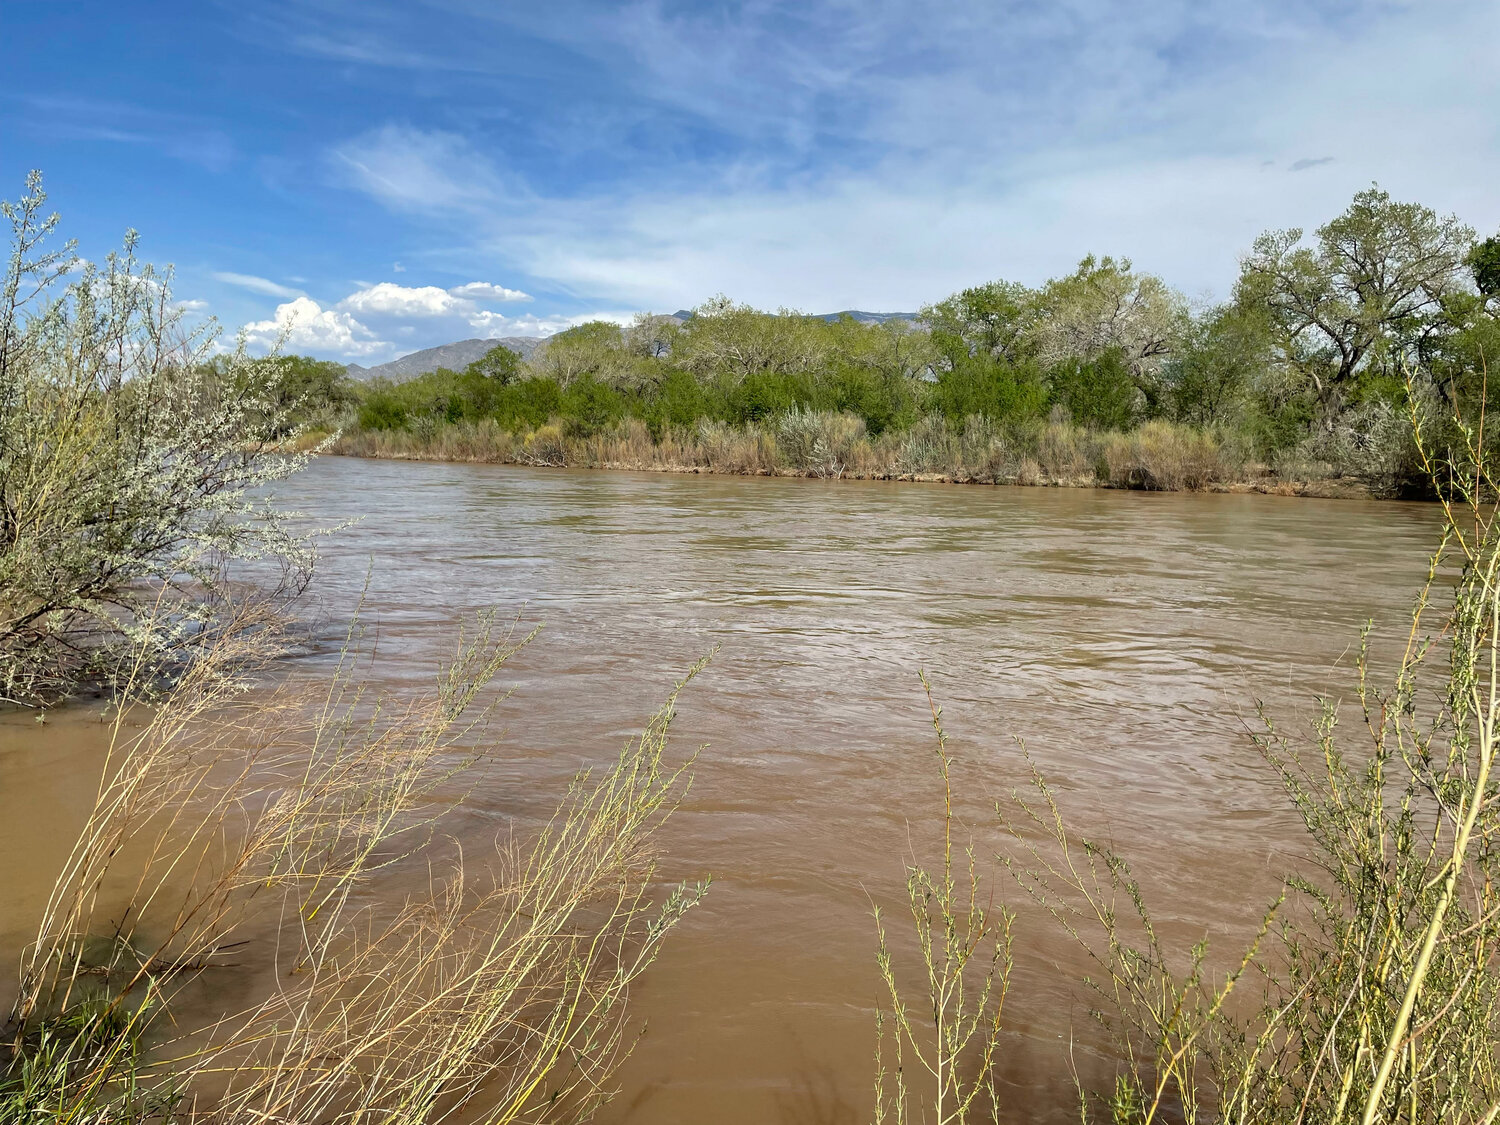 The Rio Grande, shown here as it flows by Corrales, is a lifeline for New Mexico farmers.